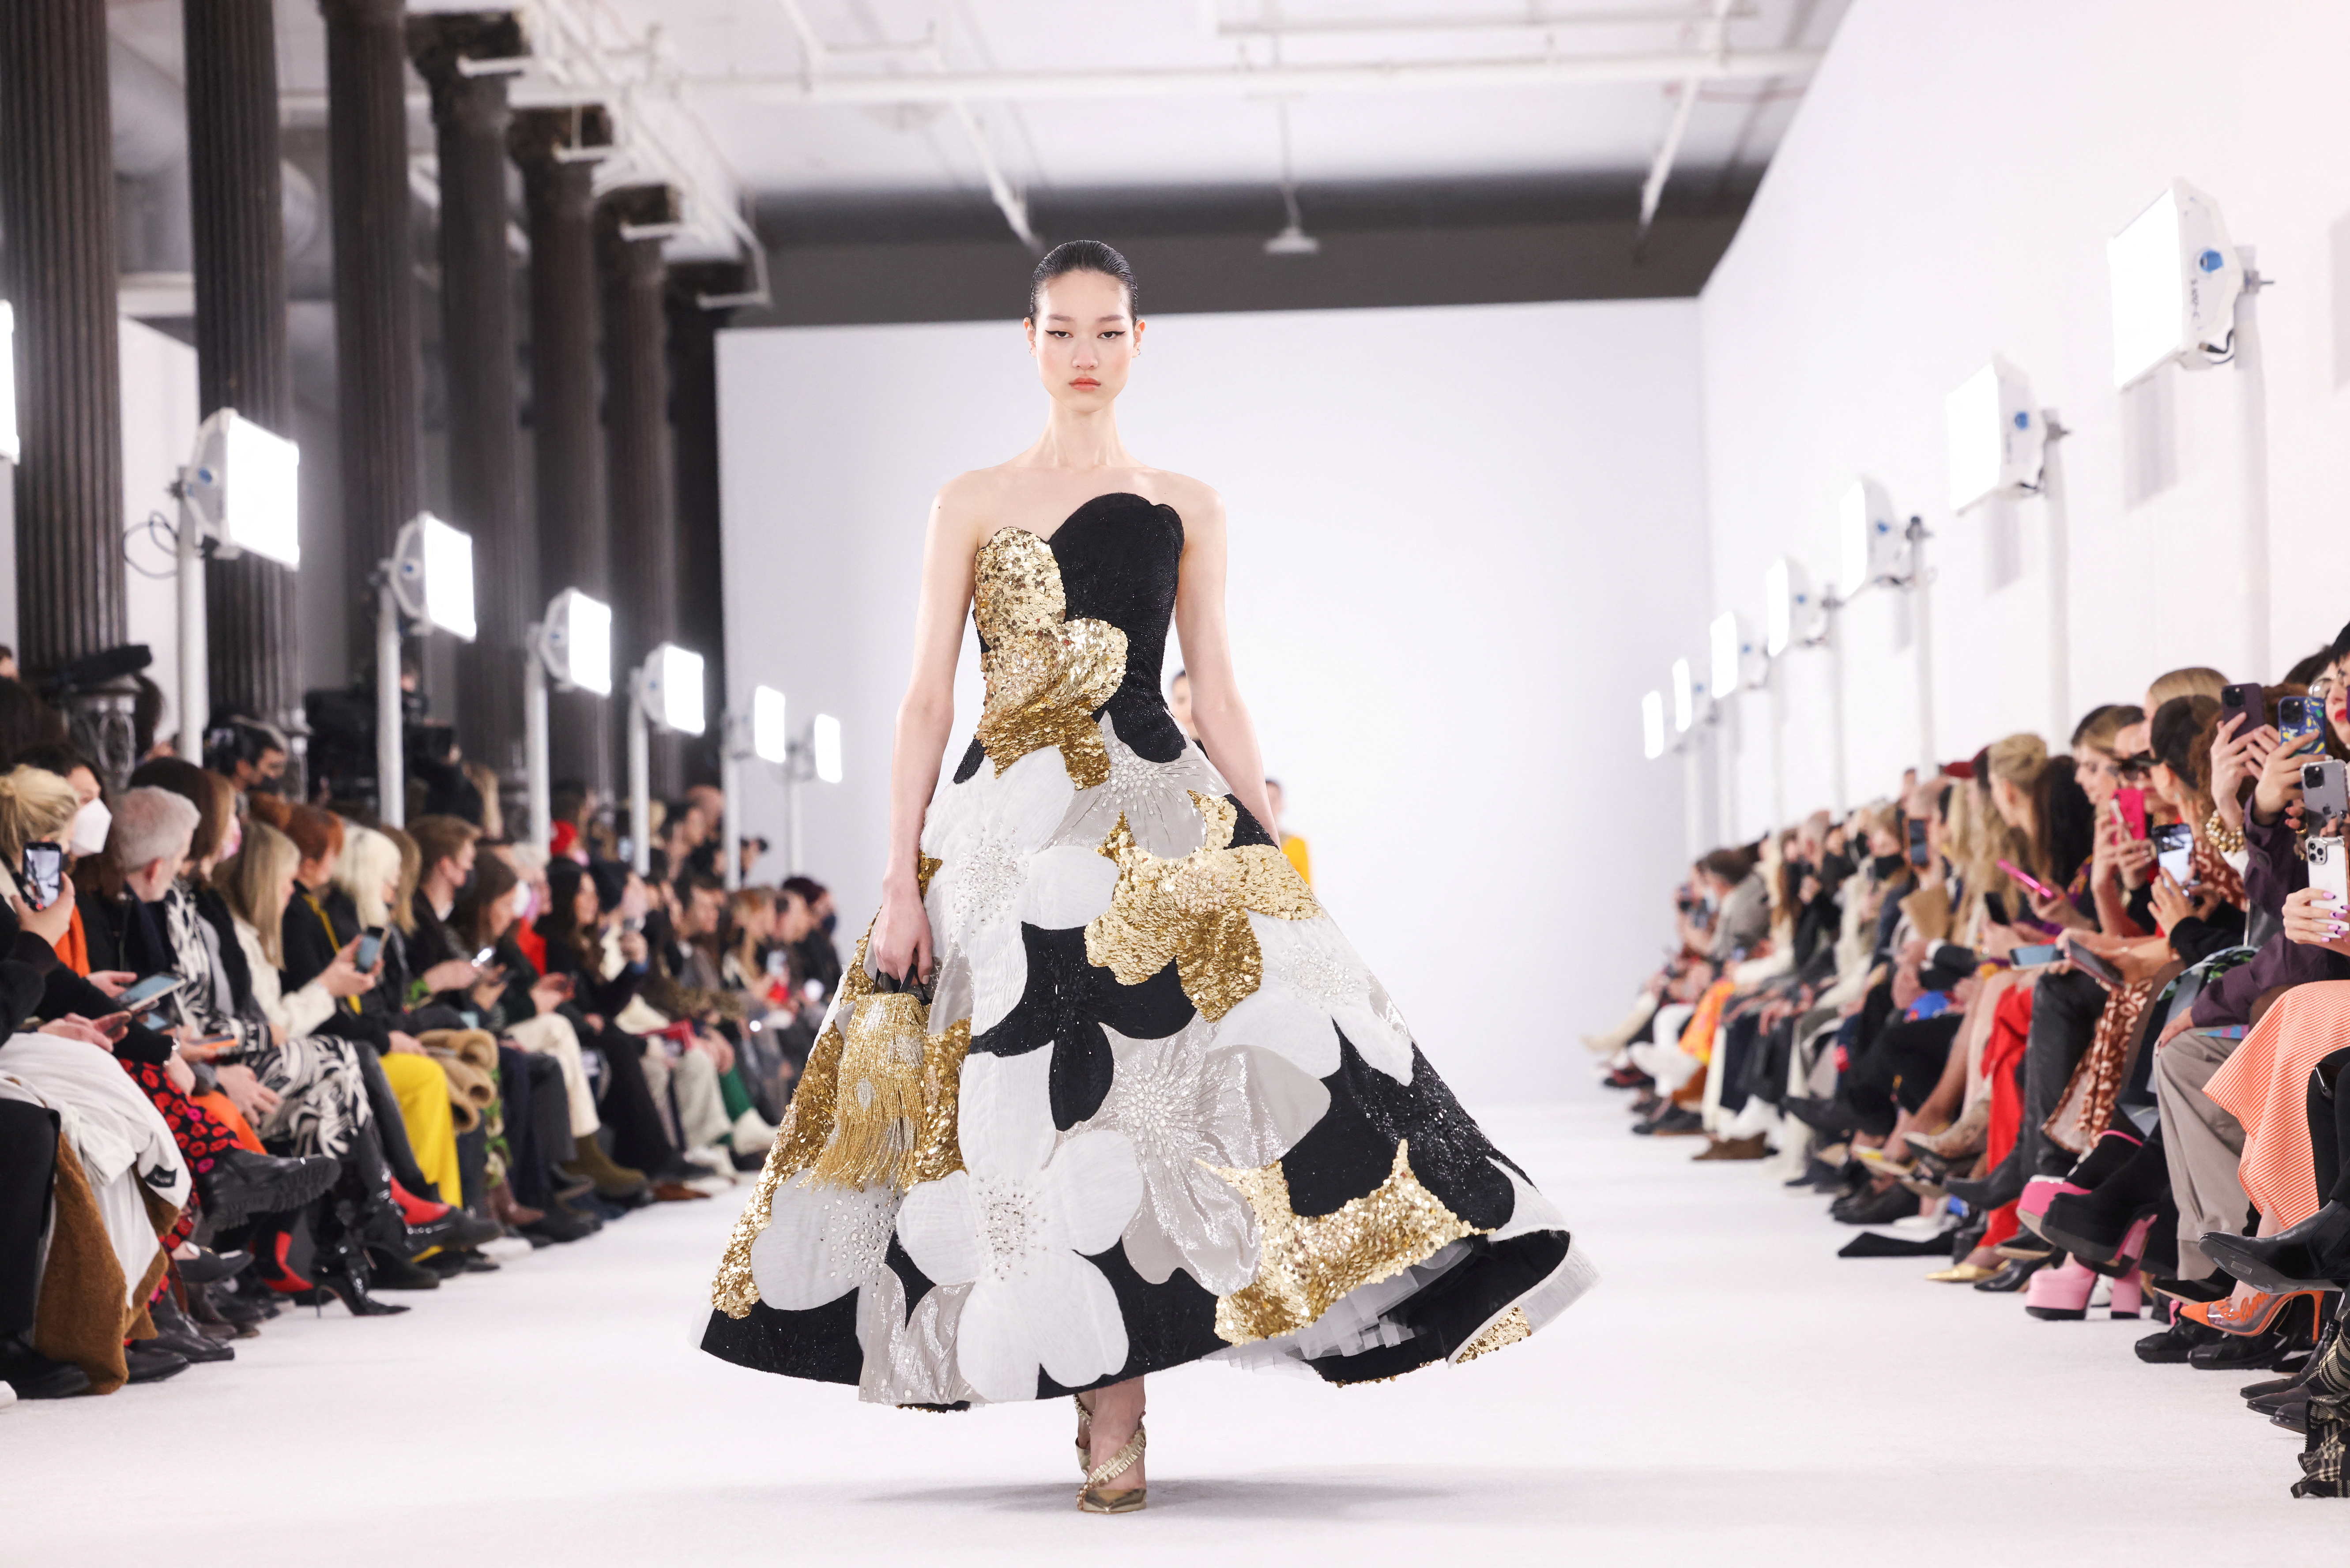 Tech and sustainability get a glamorous twist at Haute Couture Fashion Week